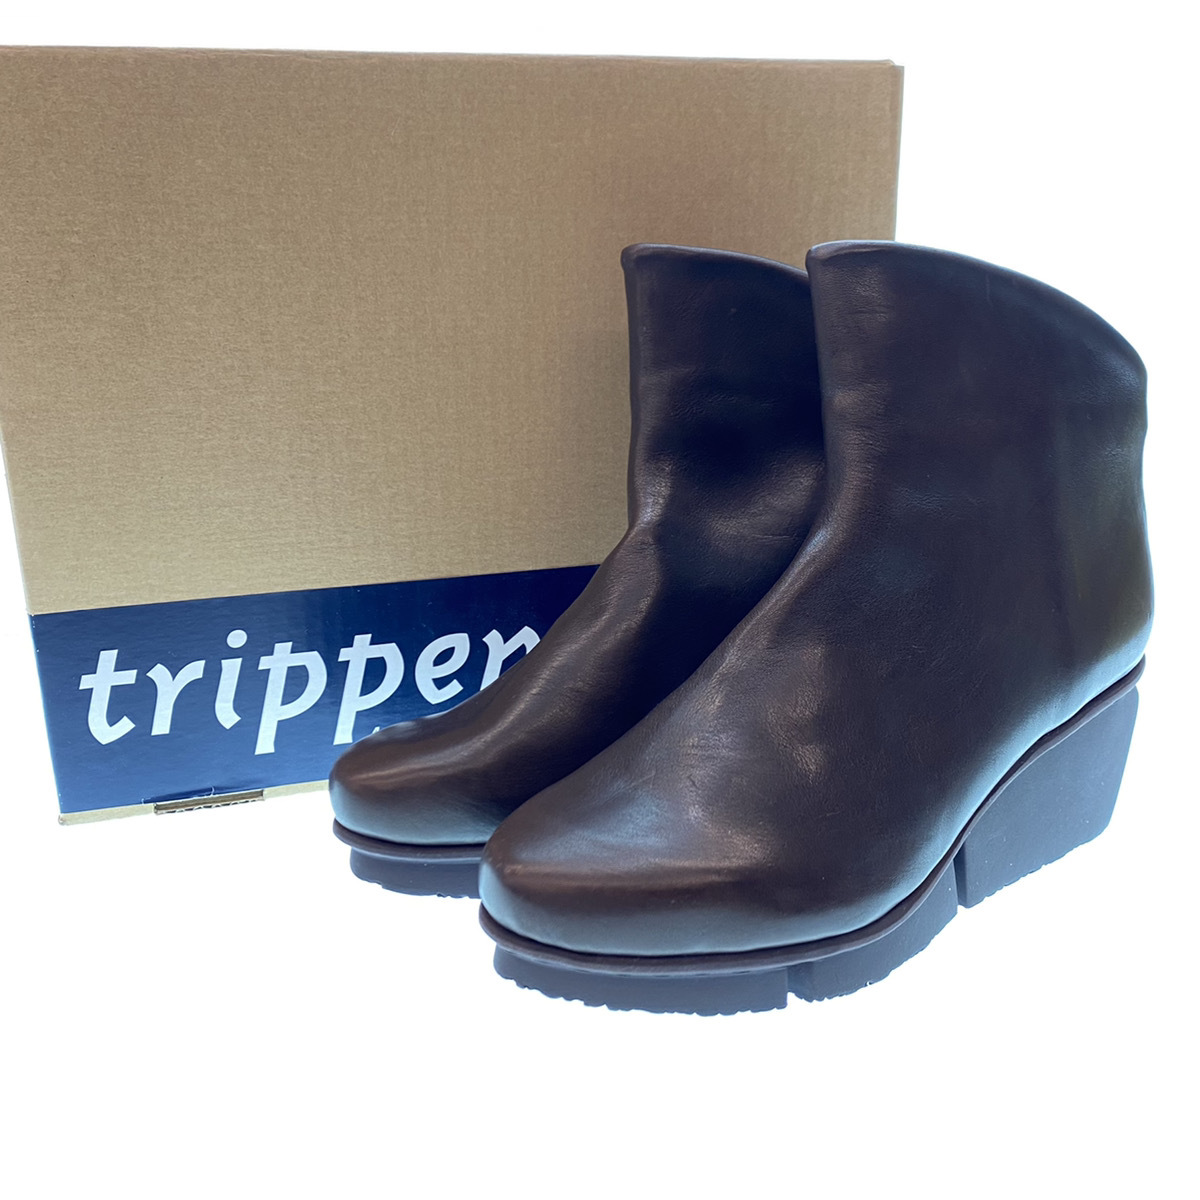 ○TRIPPEN トリッペン ショートブーツ SWIFT-WAW82 Made in GERMANY